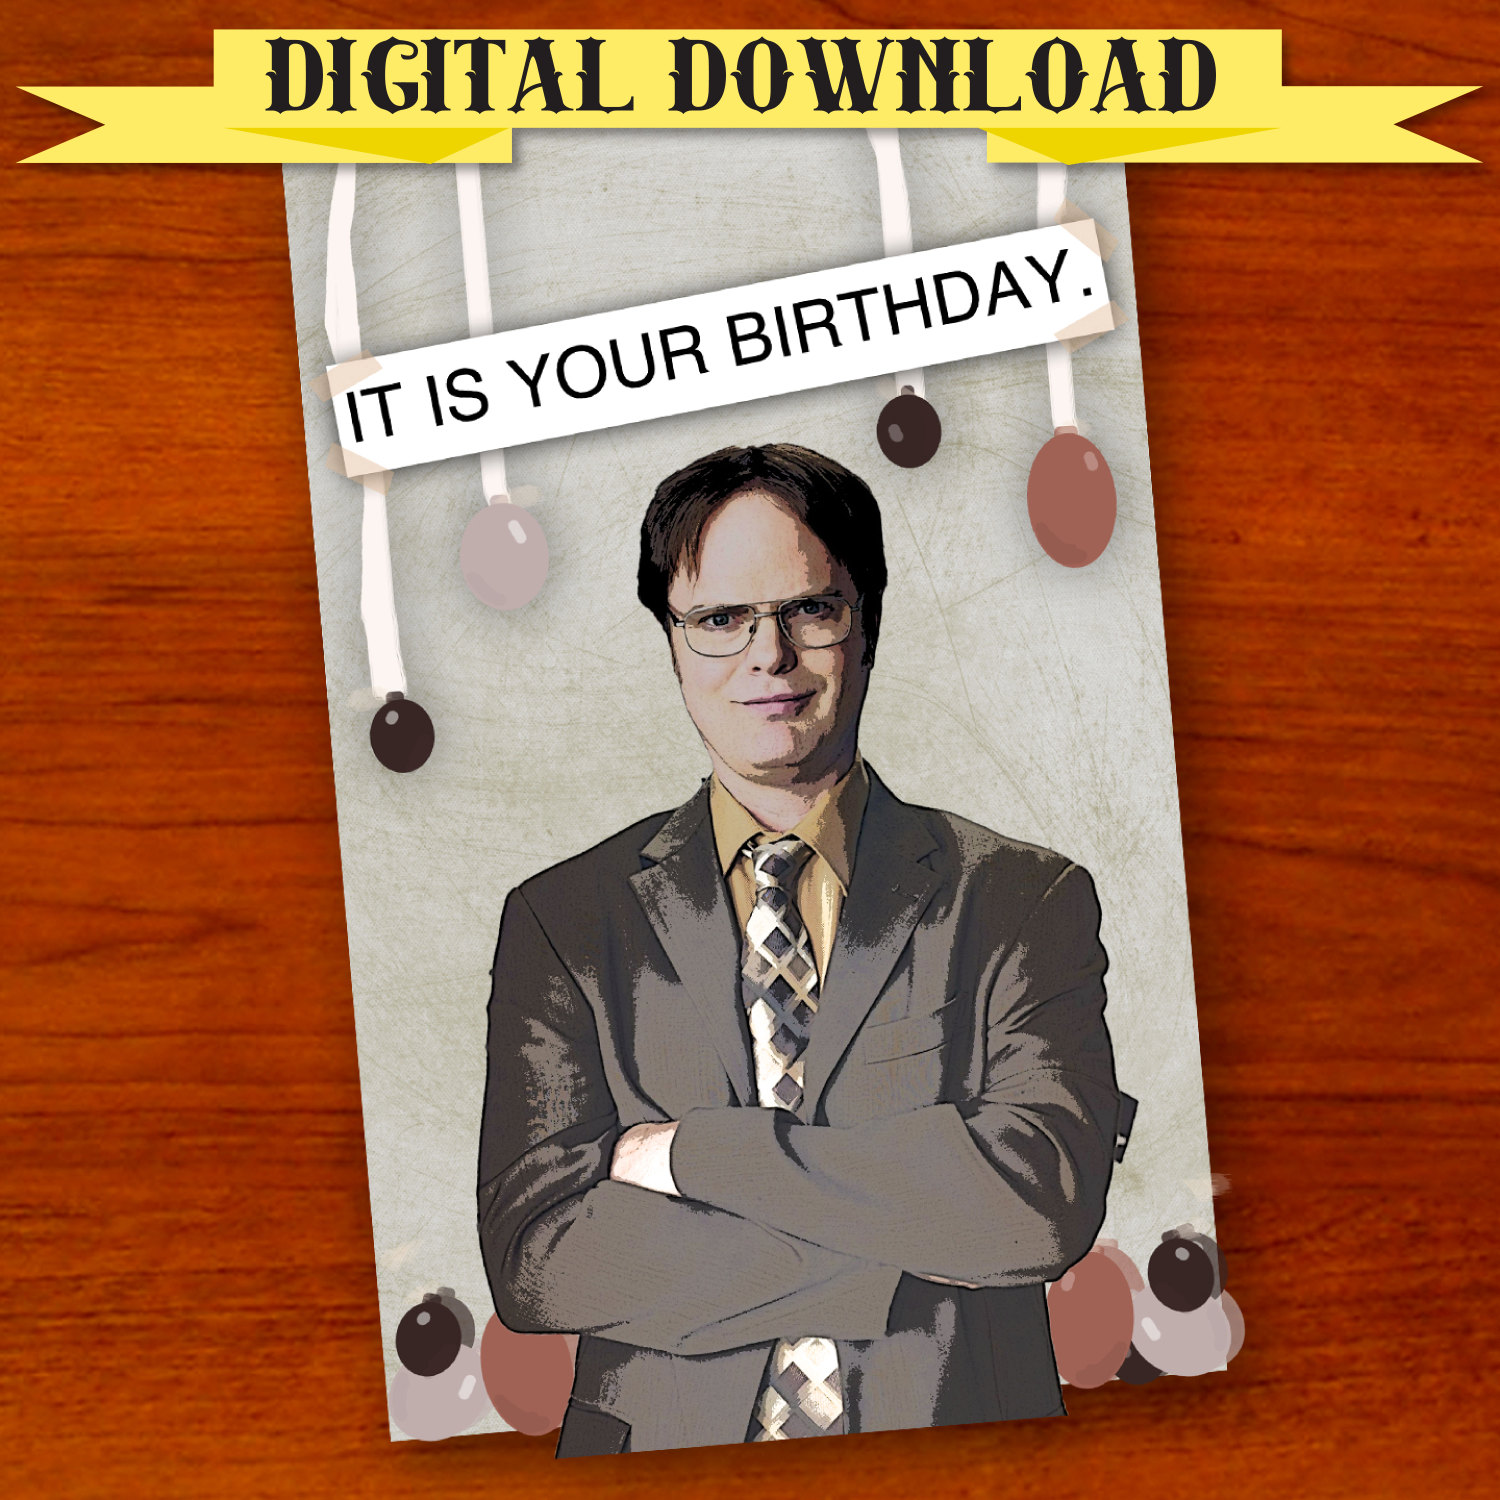 dwight-schrute-the-office-birthday-card-digital-download-etsy